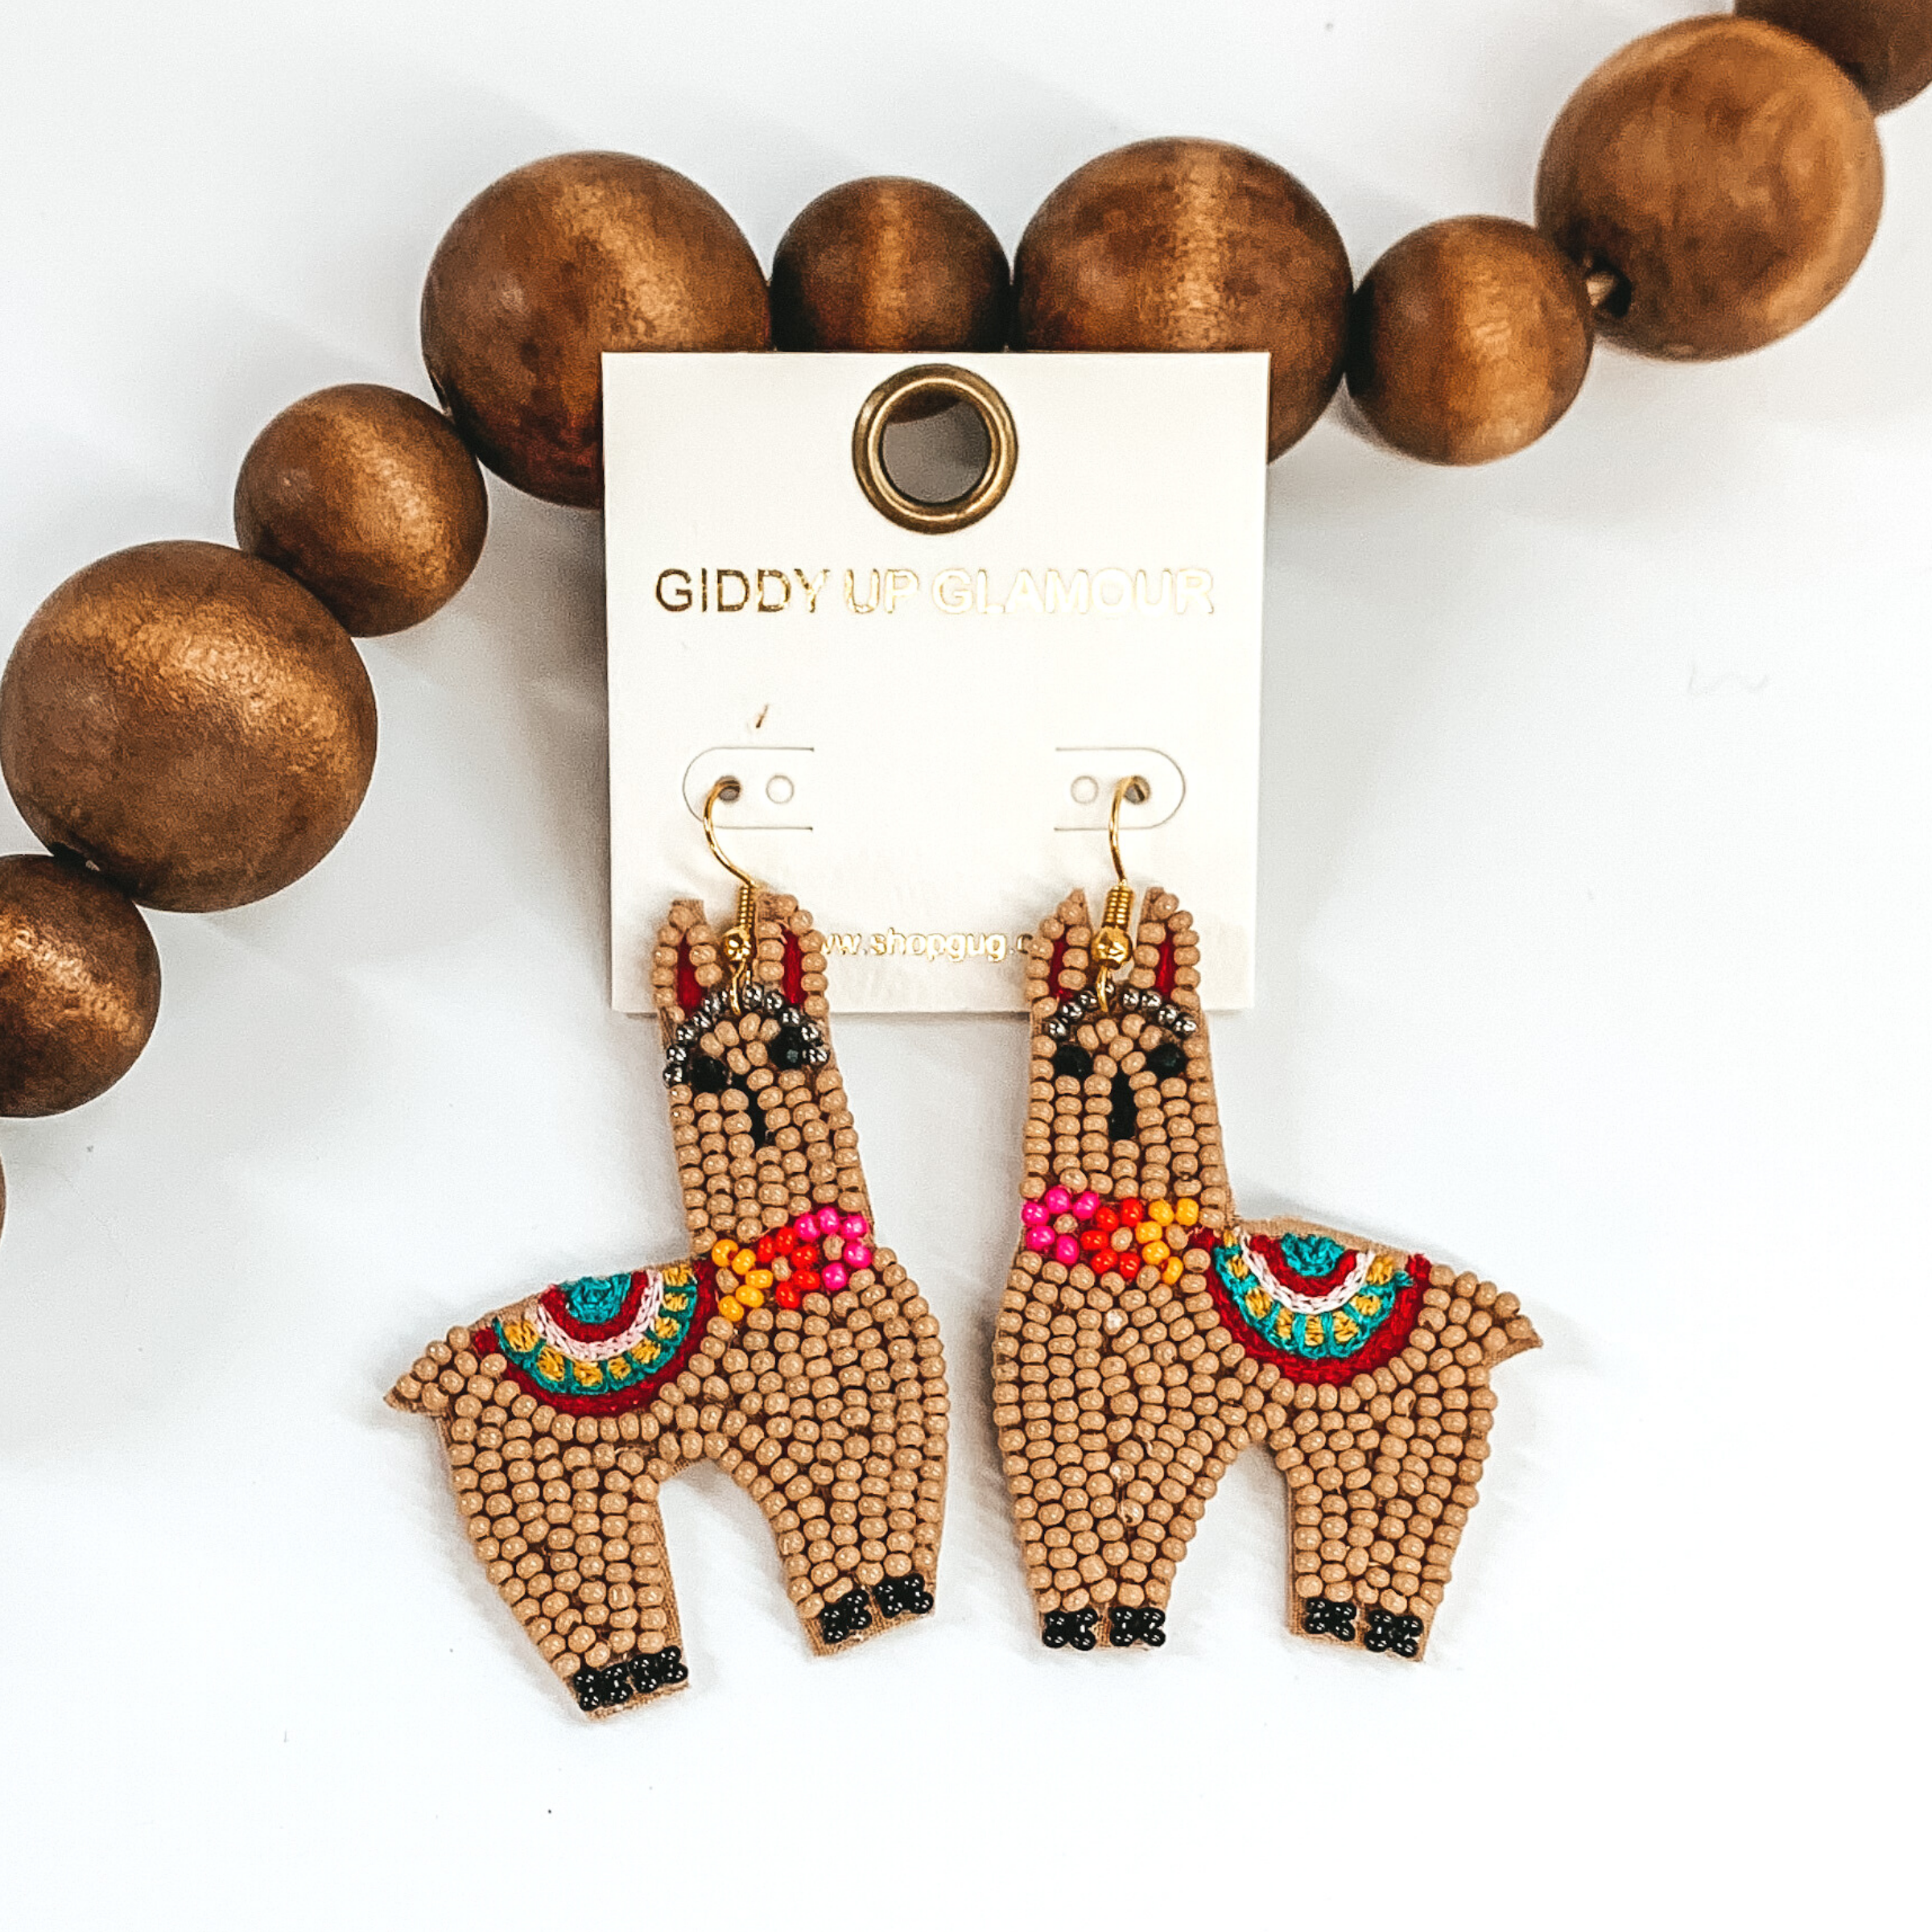 Llama shaped beaded dangle earrings in tan. These earrings also includes some colorful stitching details. These earrings are pictured on a white background with dark brown beads towards the top of the picture.